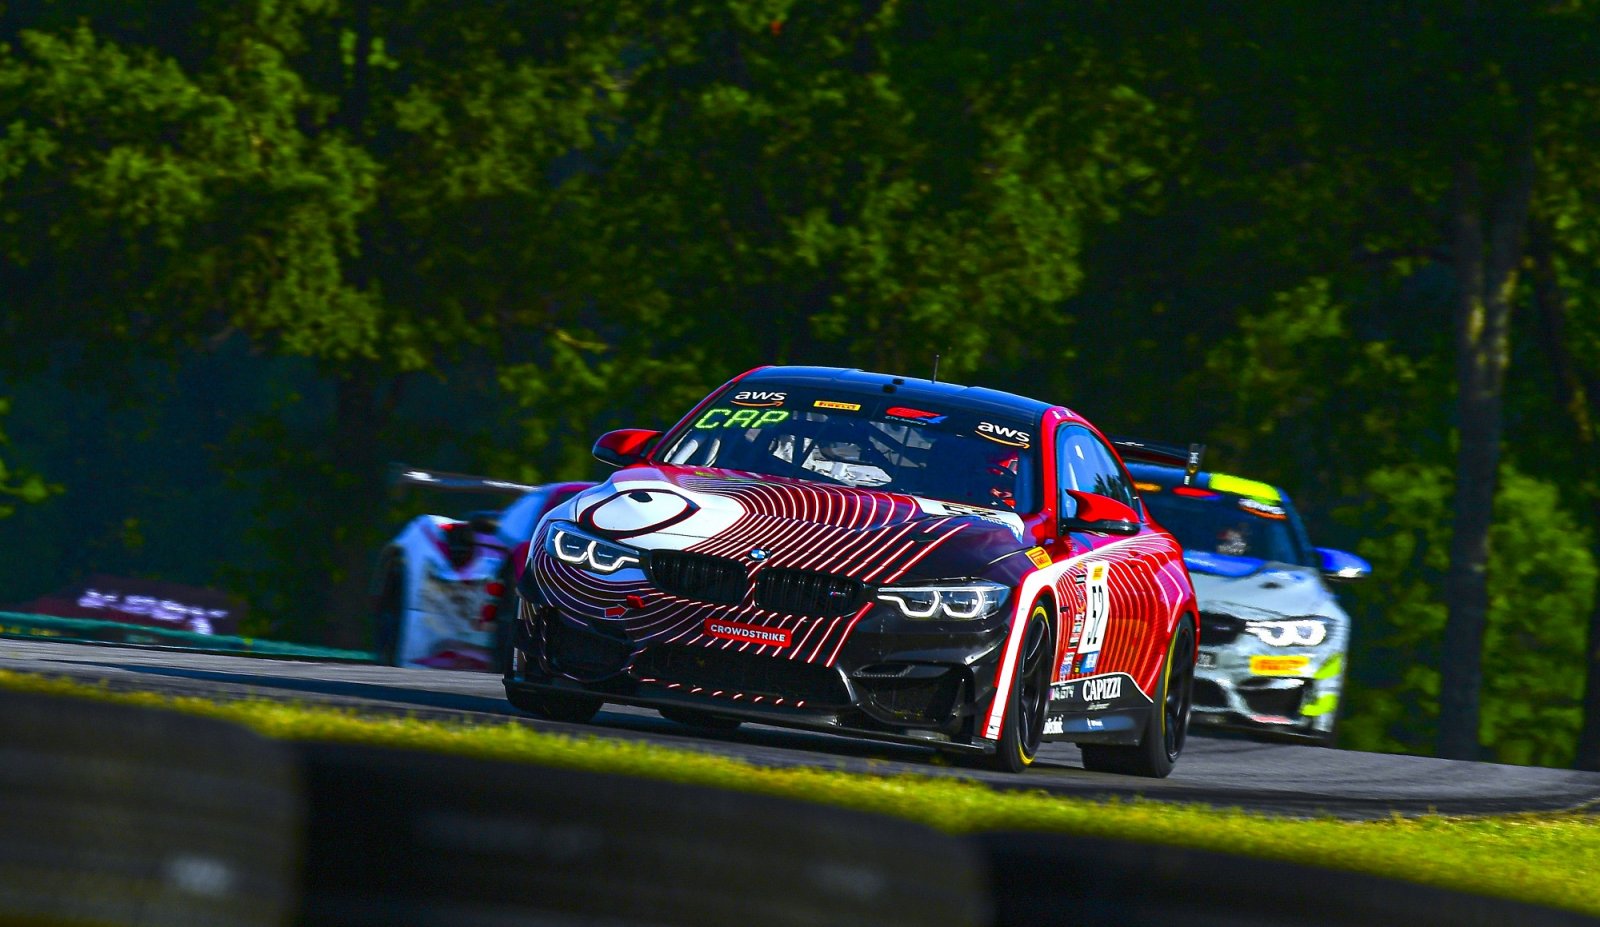 RS1, Auto Technic, and BimmerWorld Sit Atop the Podium in Race 1 at VIR